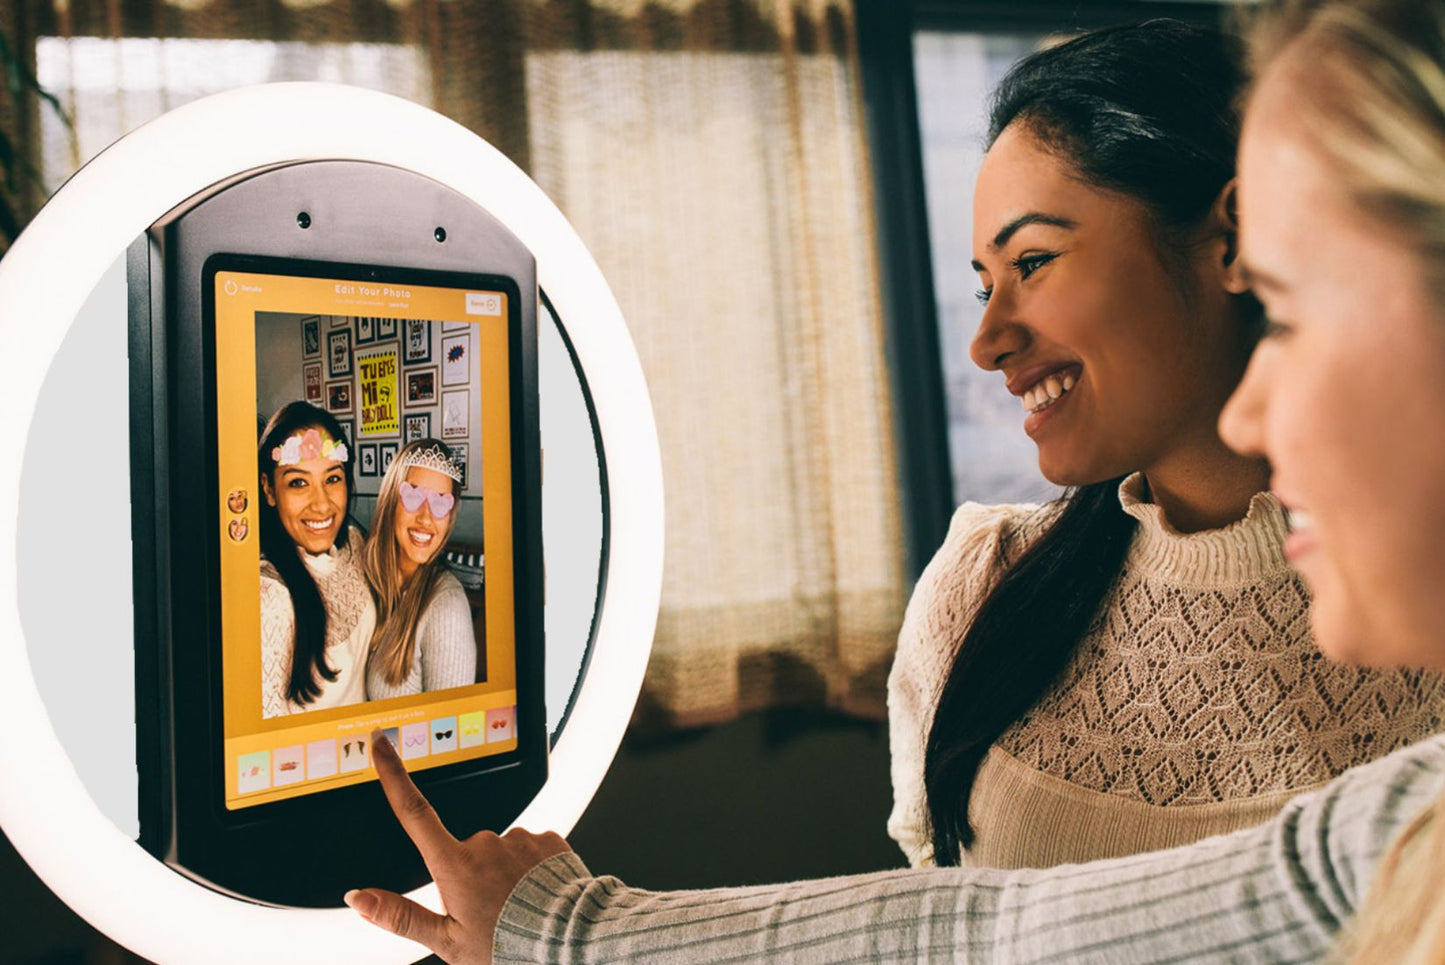 Image of women using rented photo booth in bowie, Maryland.